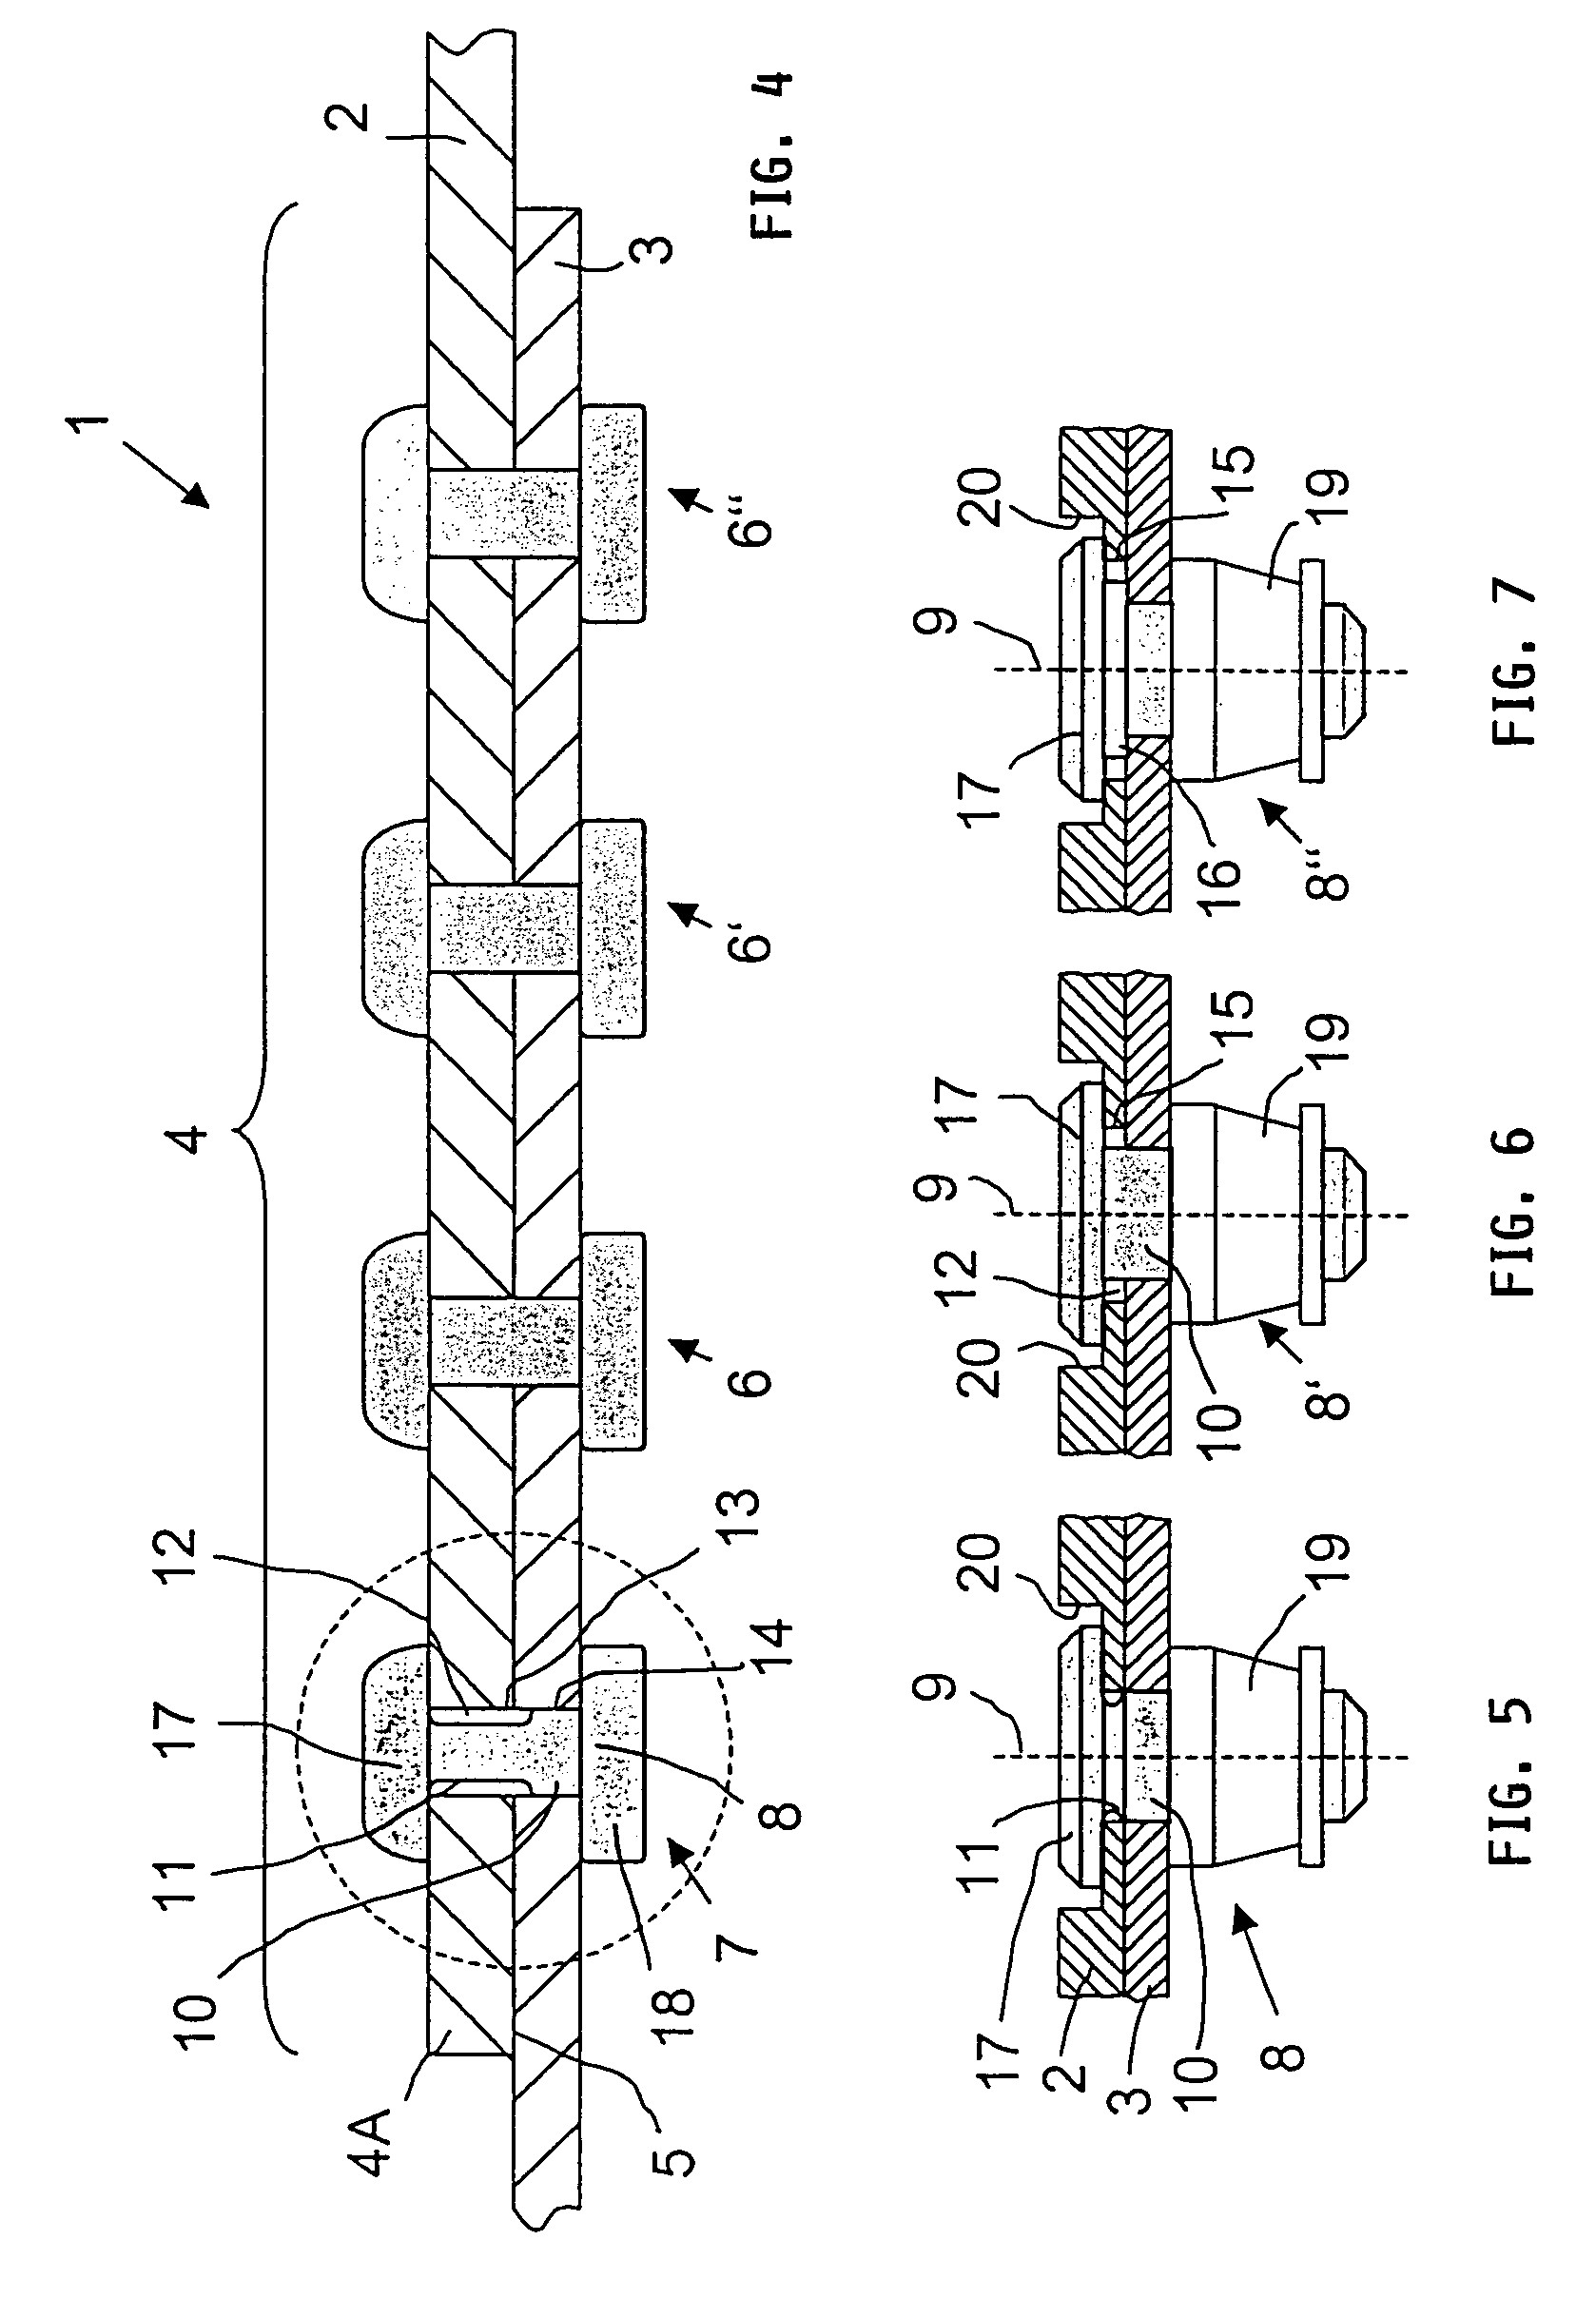 Splicing for interconnected thin-walled metal structures